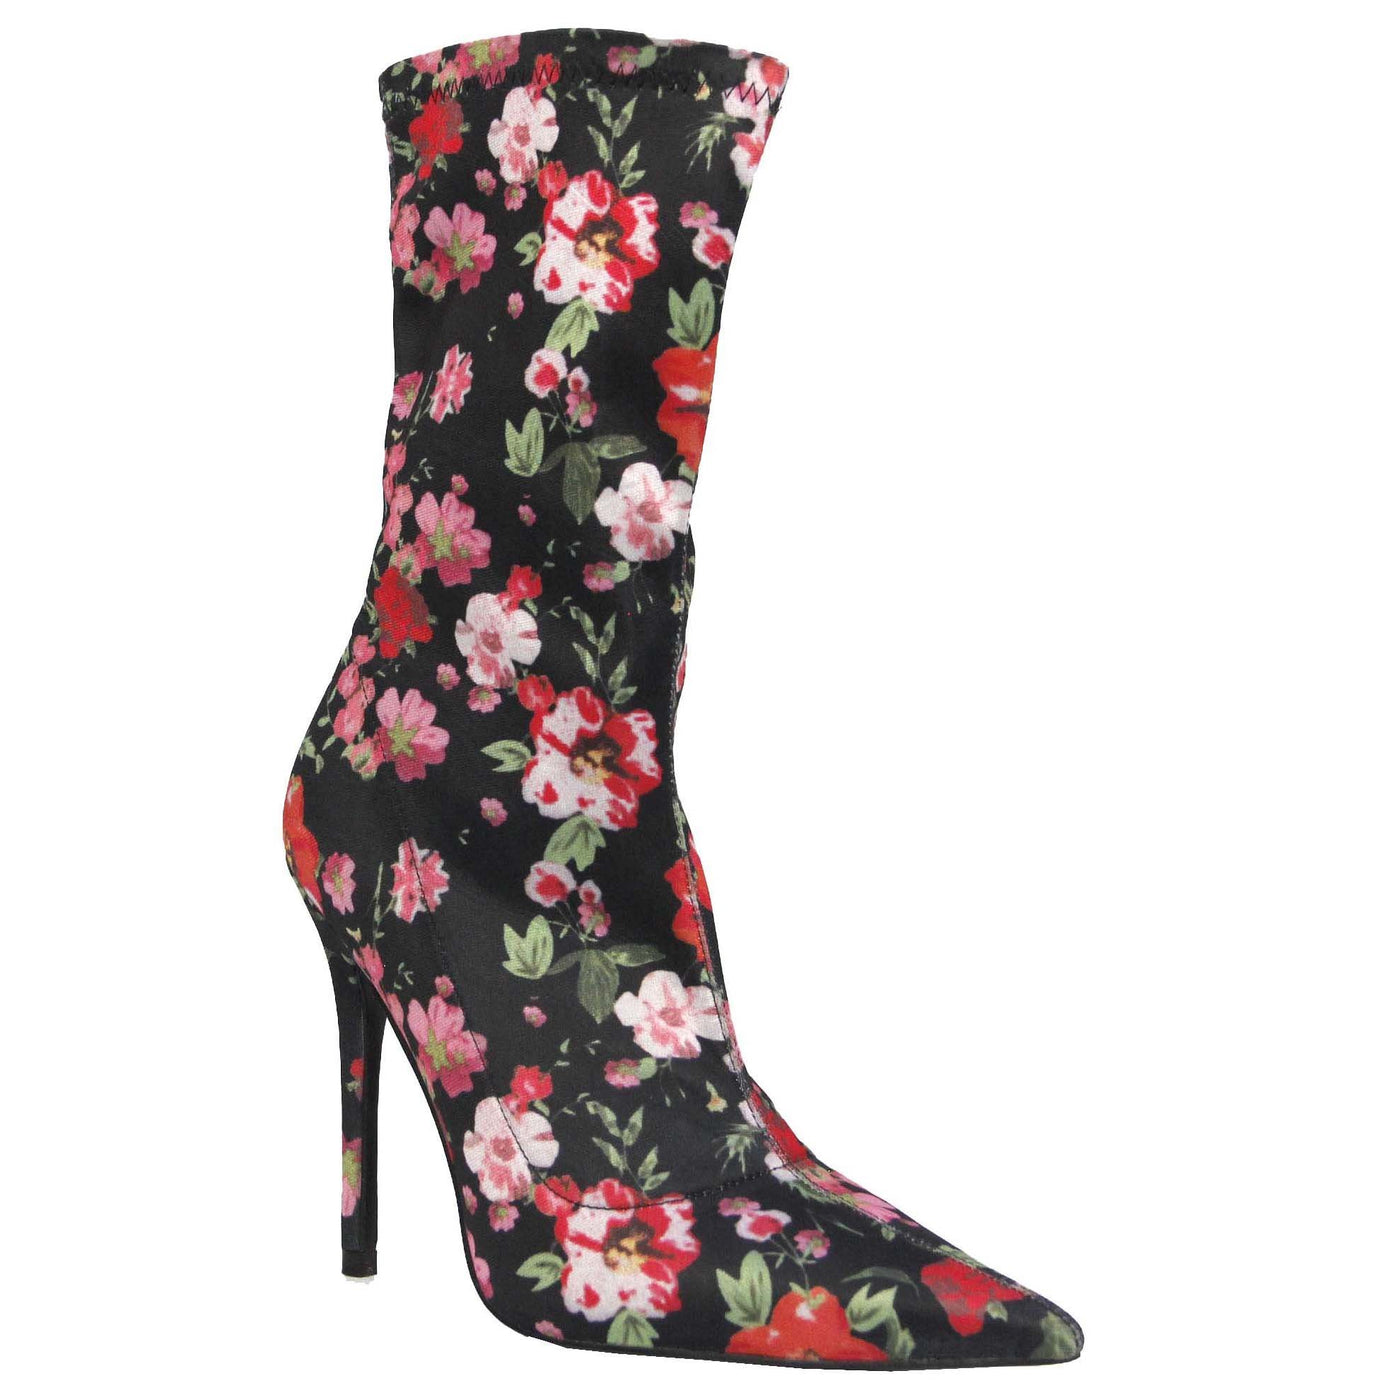 Therapy Sarita Stretch Lycra Stiletto Boots in Floral - Hey Sara